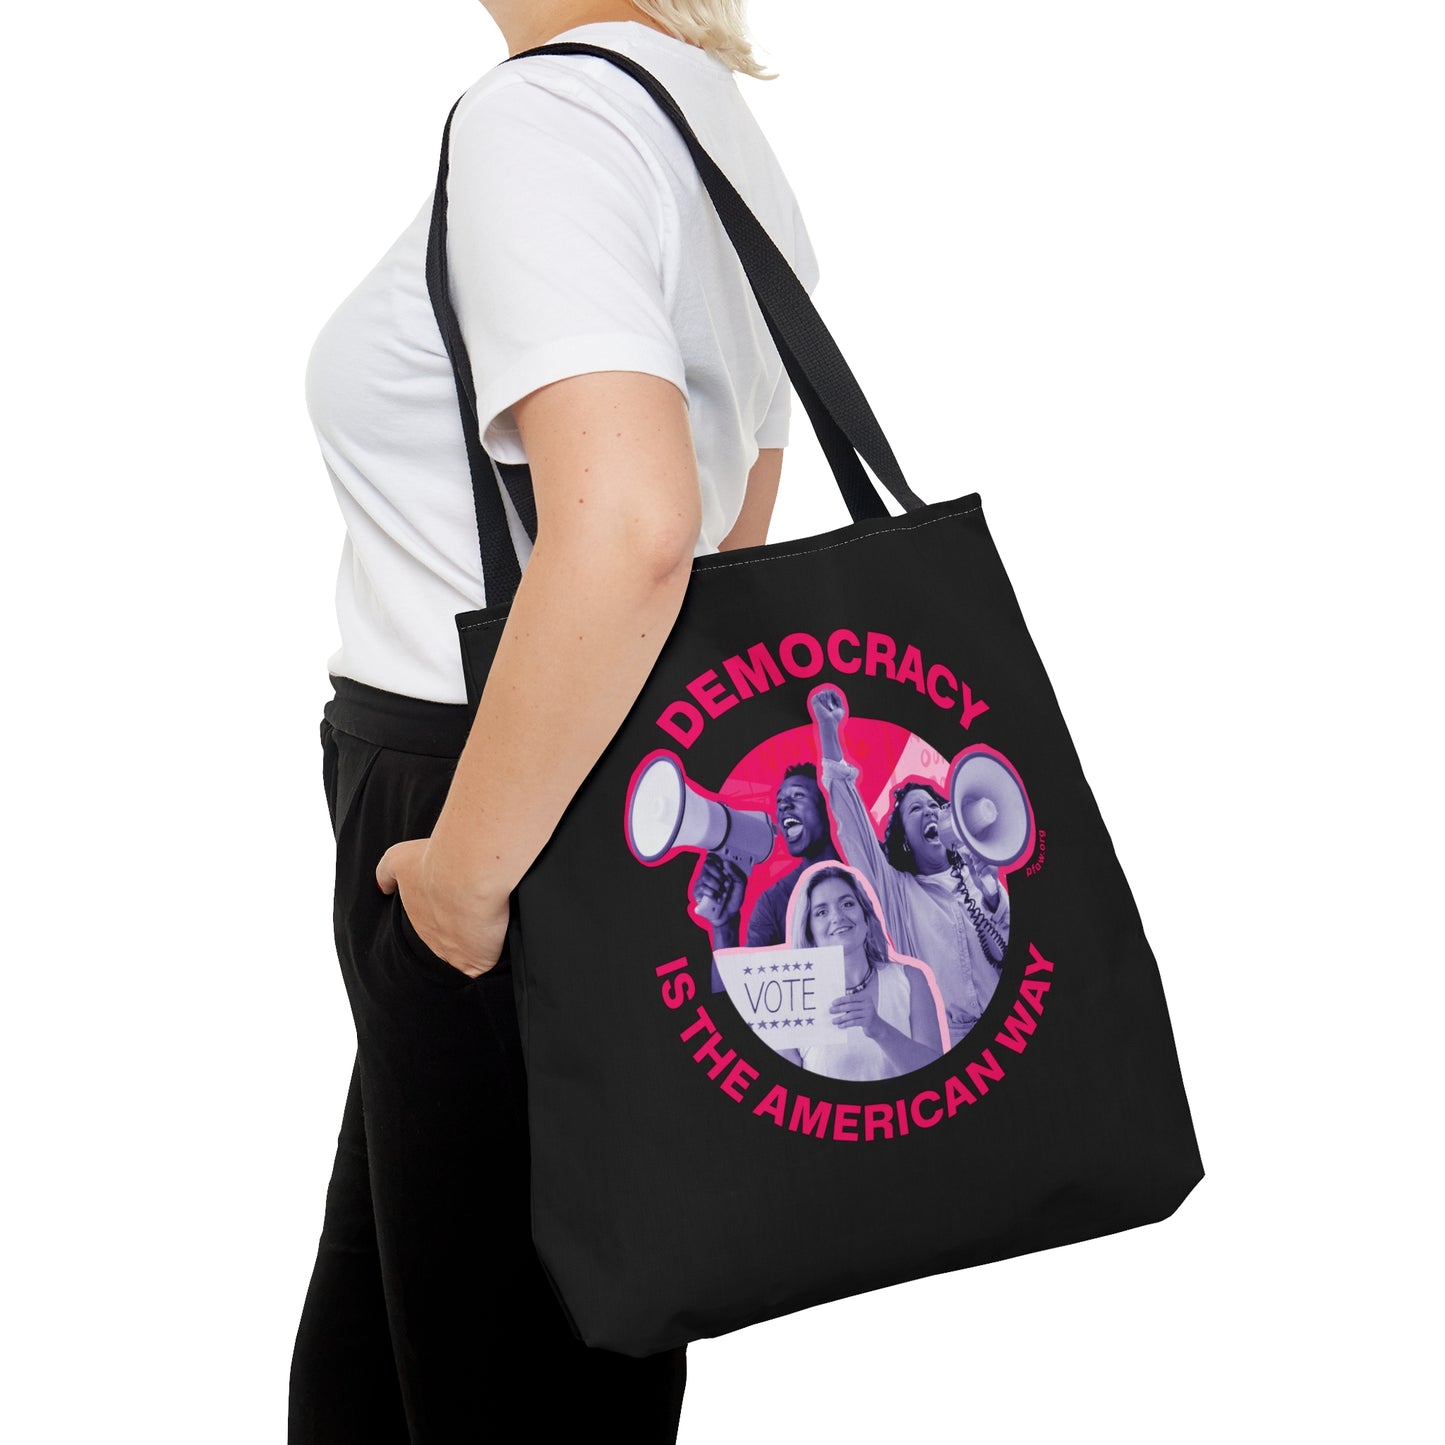 Democracy is the American Way Tote - Black